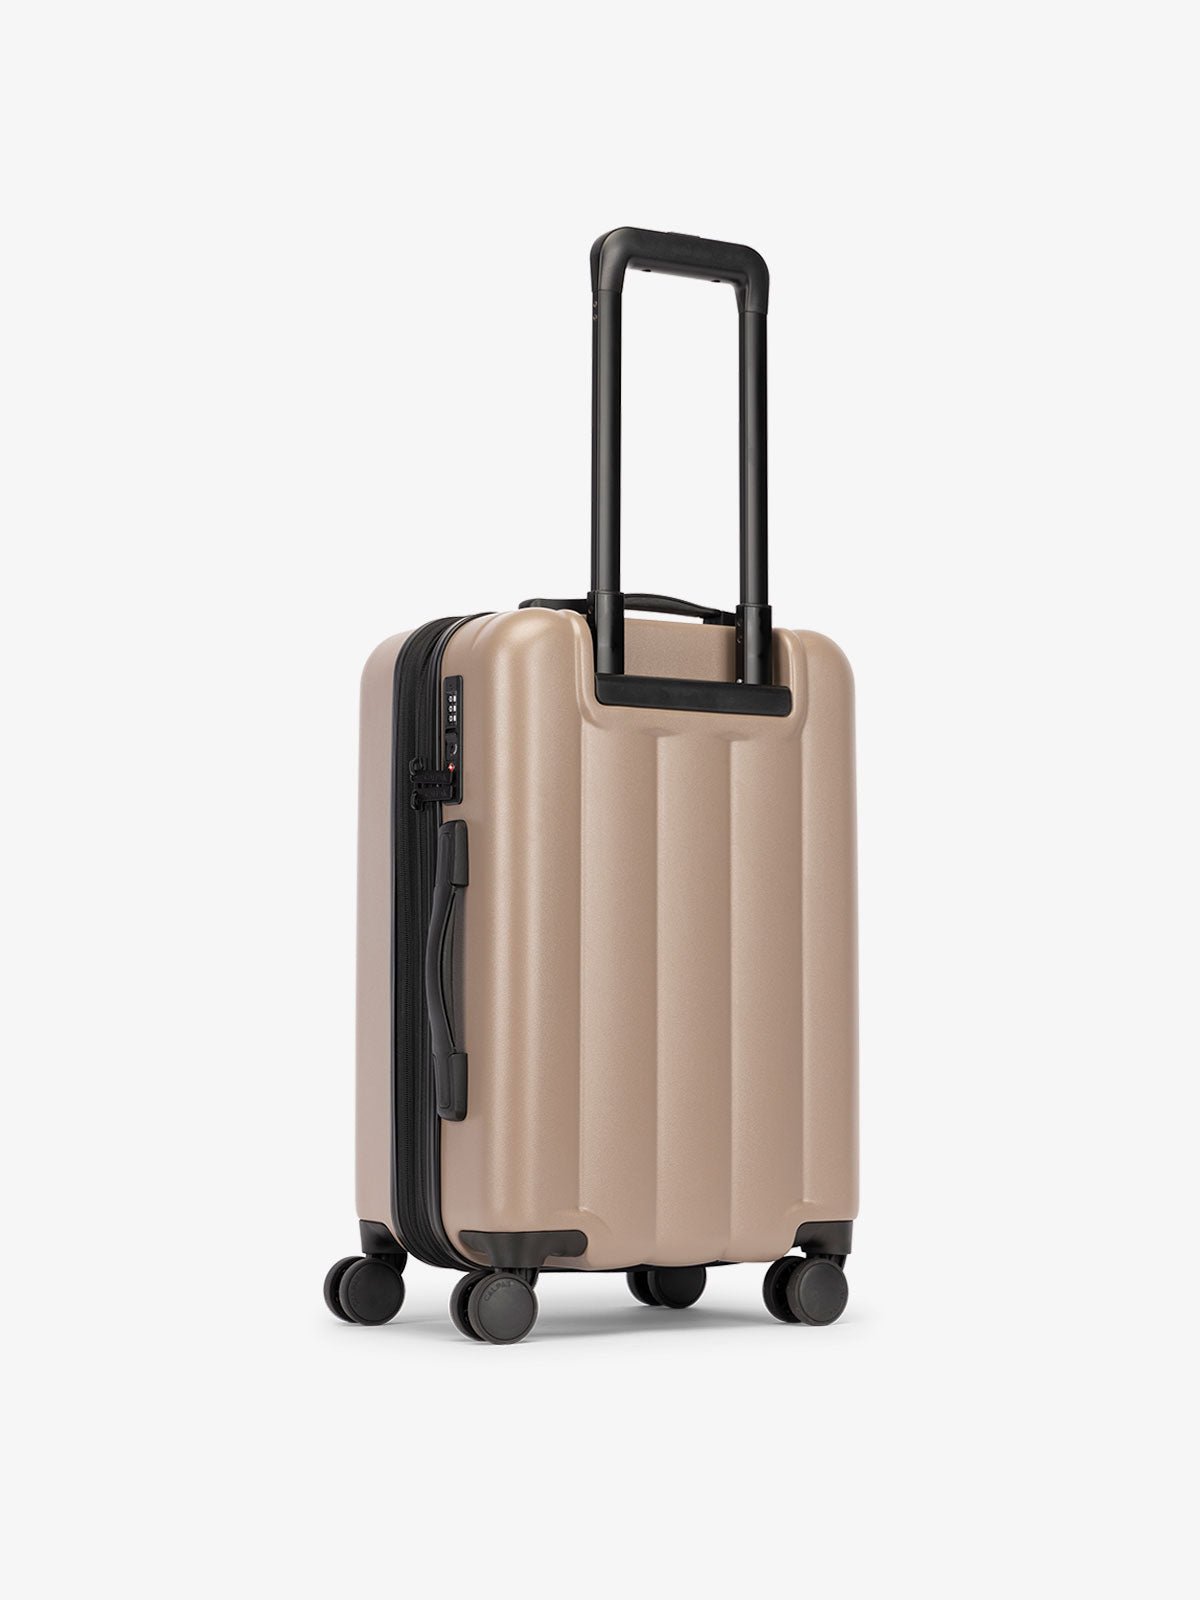 CALPAK carry-on luggage featuring dual spinner wheels and bottom grab handle in chocolate